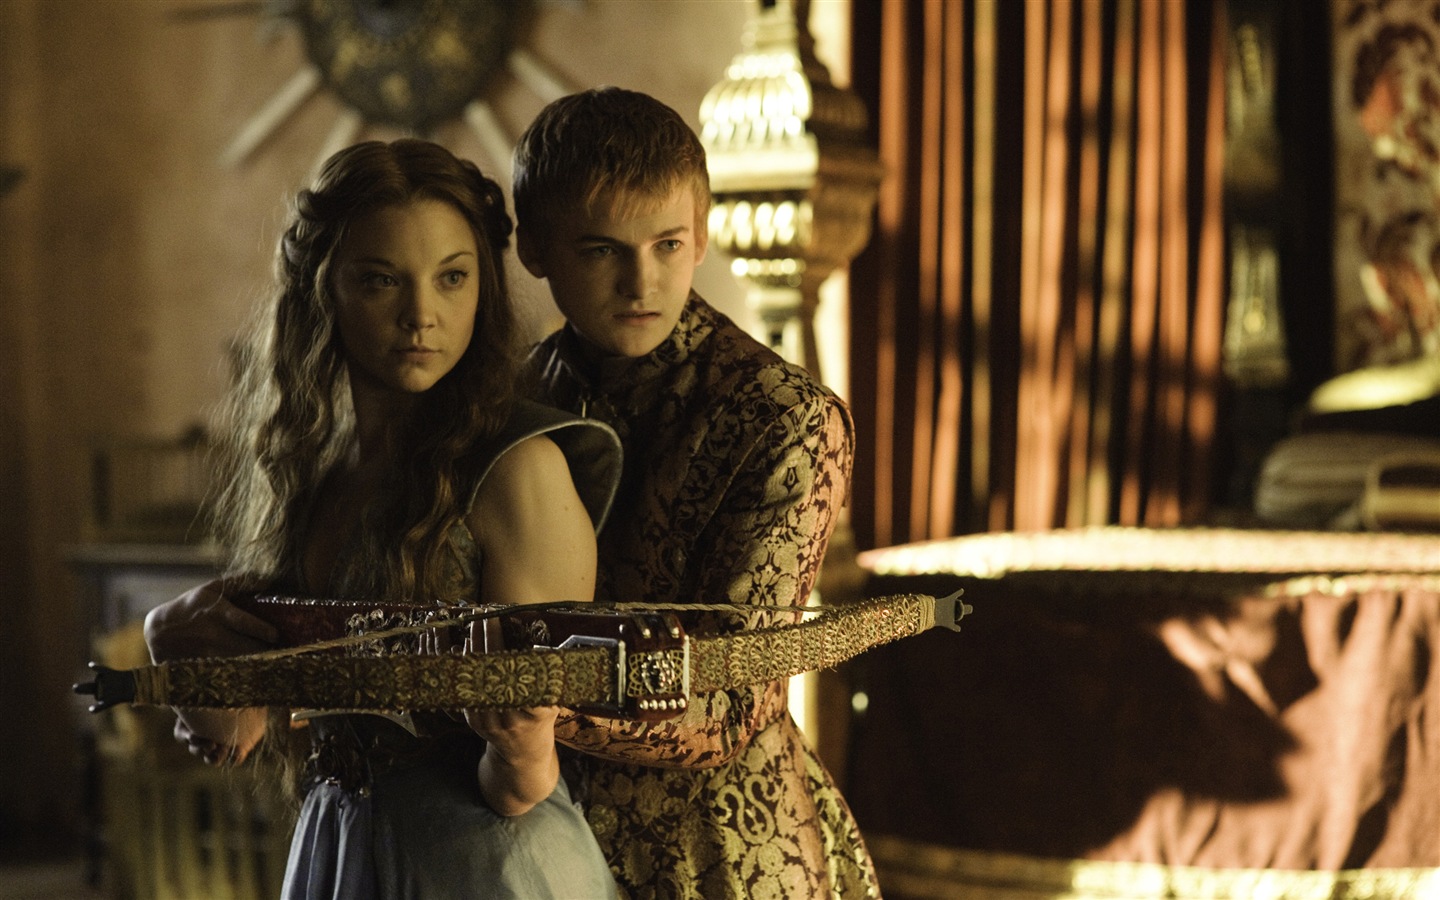 A Song of Ice and Fire: Game of Thrones 冰與火之歌：權力的遊戲高清壁紙 #38 - 1440x900